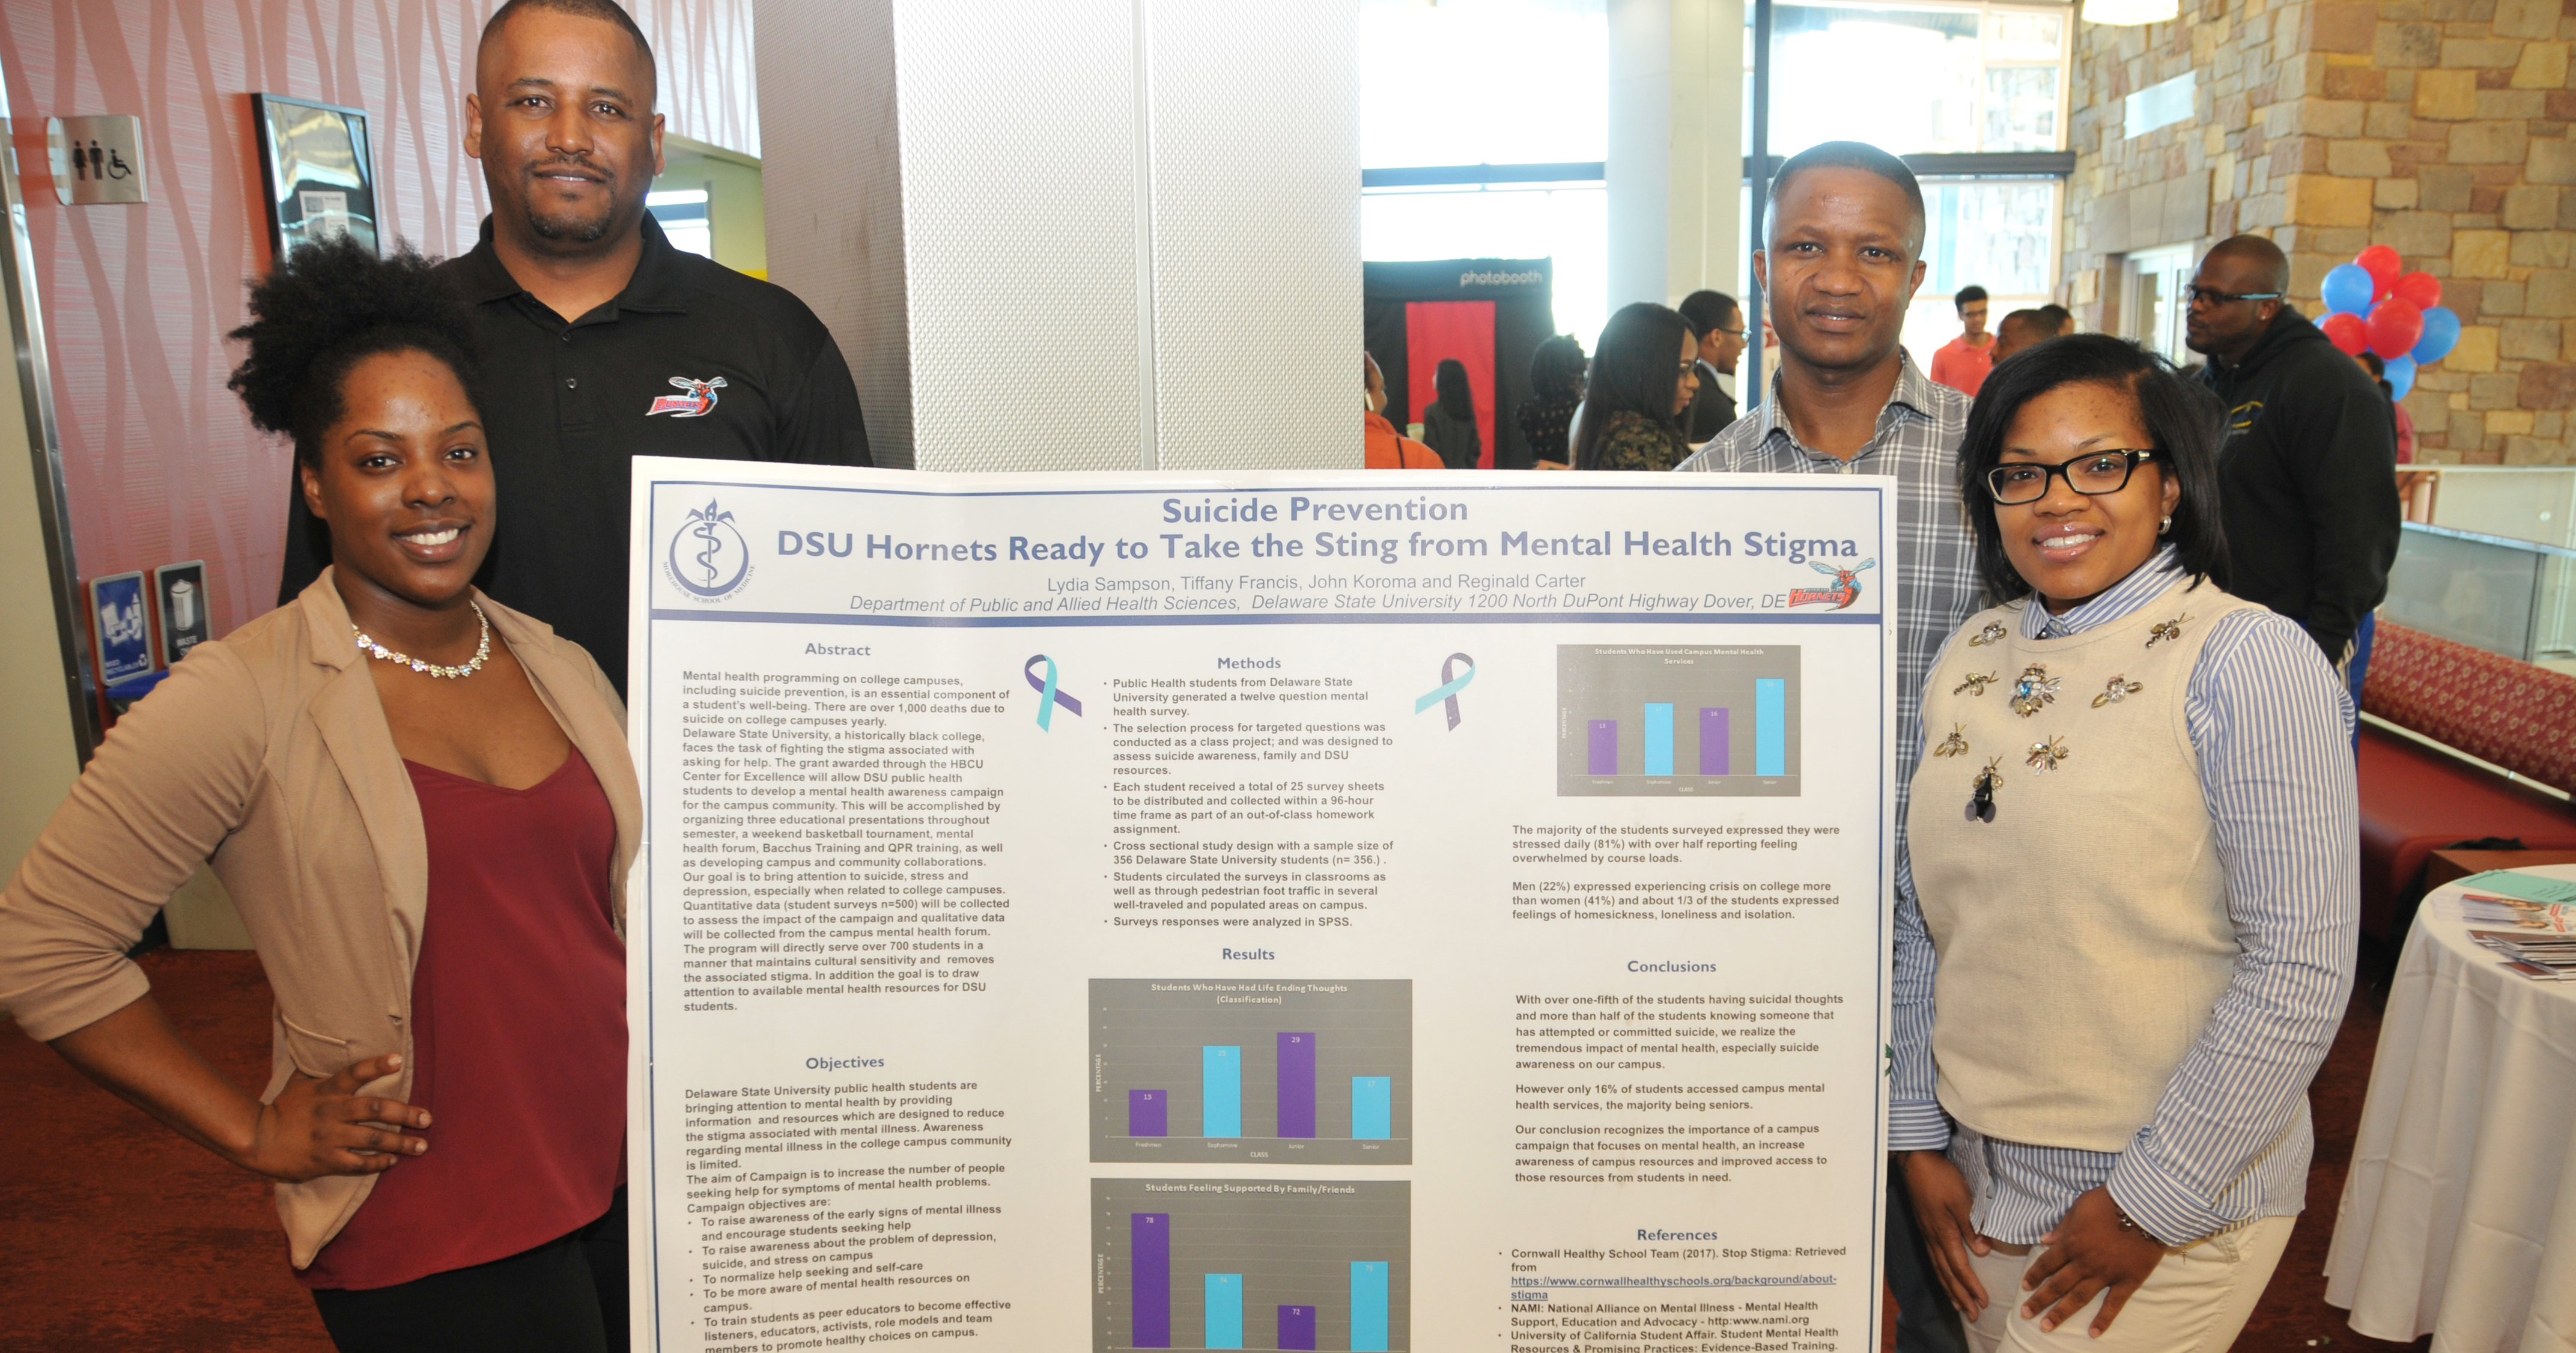 The first-place research poster winning team: (l-r) Lydia Sampson of Lewes, Del., Reginald Carter of Marydel, Md., John Koroma of Sierra Leone, West Africa, and Tiffany Francis of Middletown, Del. All are senior Public Health majors at DSU.